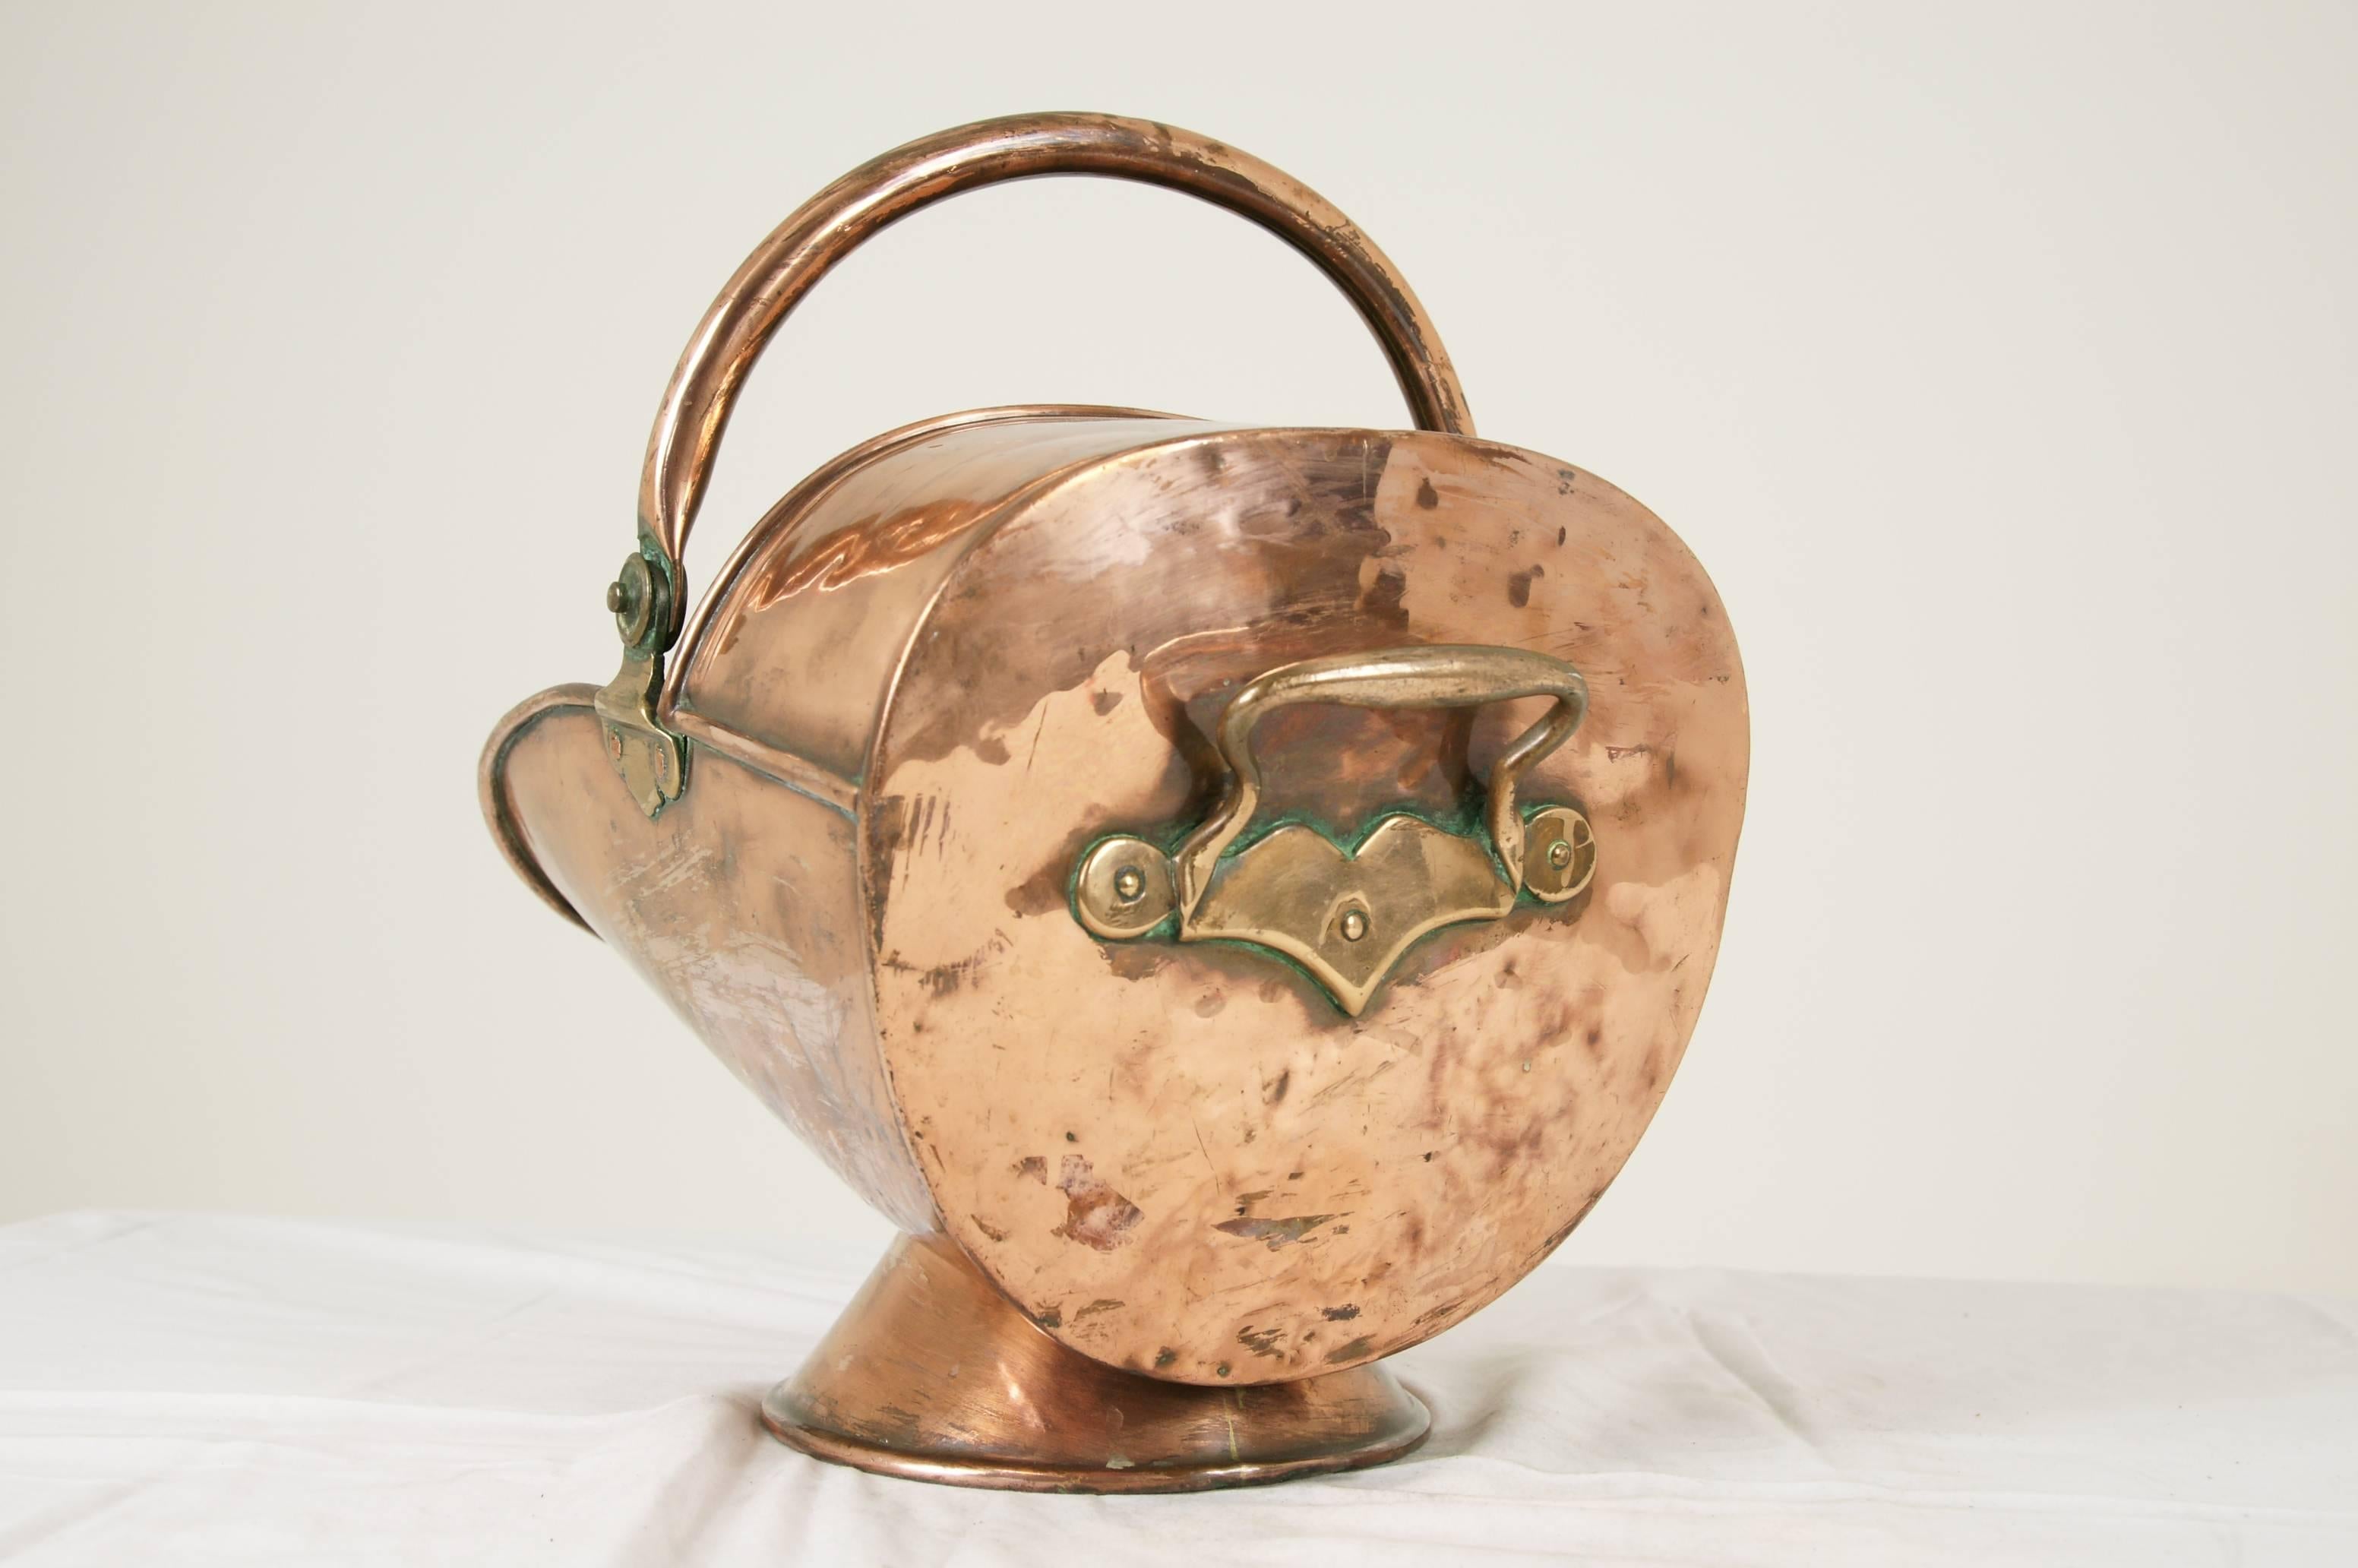 Scotland, 1880.
All original.
Open helmet shape.
Copper handle.
Brass handle riveted on back.
Solid to the base.
Was $625 now just $300!
Lot B-204.
Measures: 20